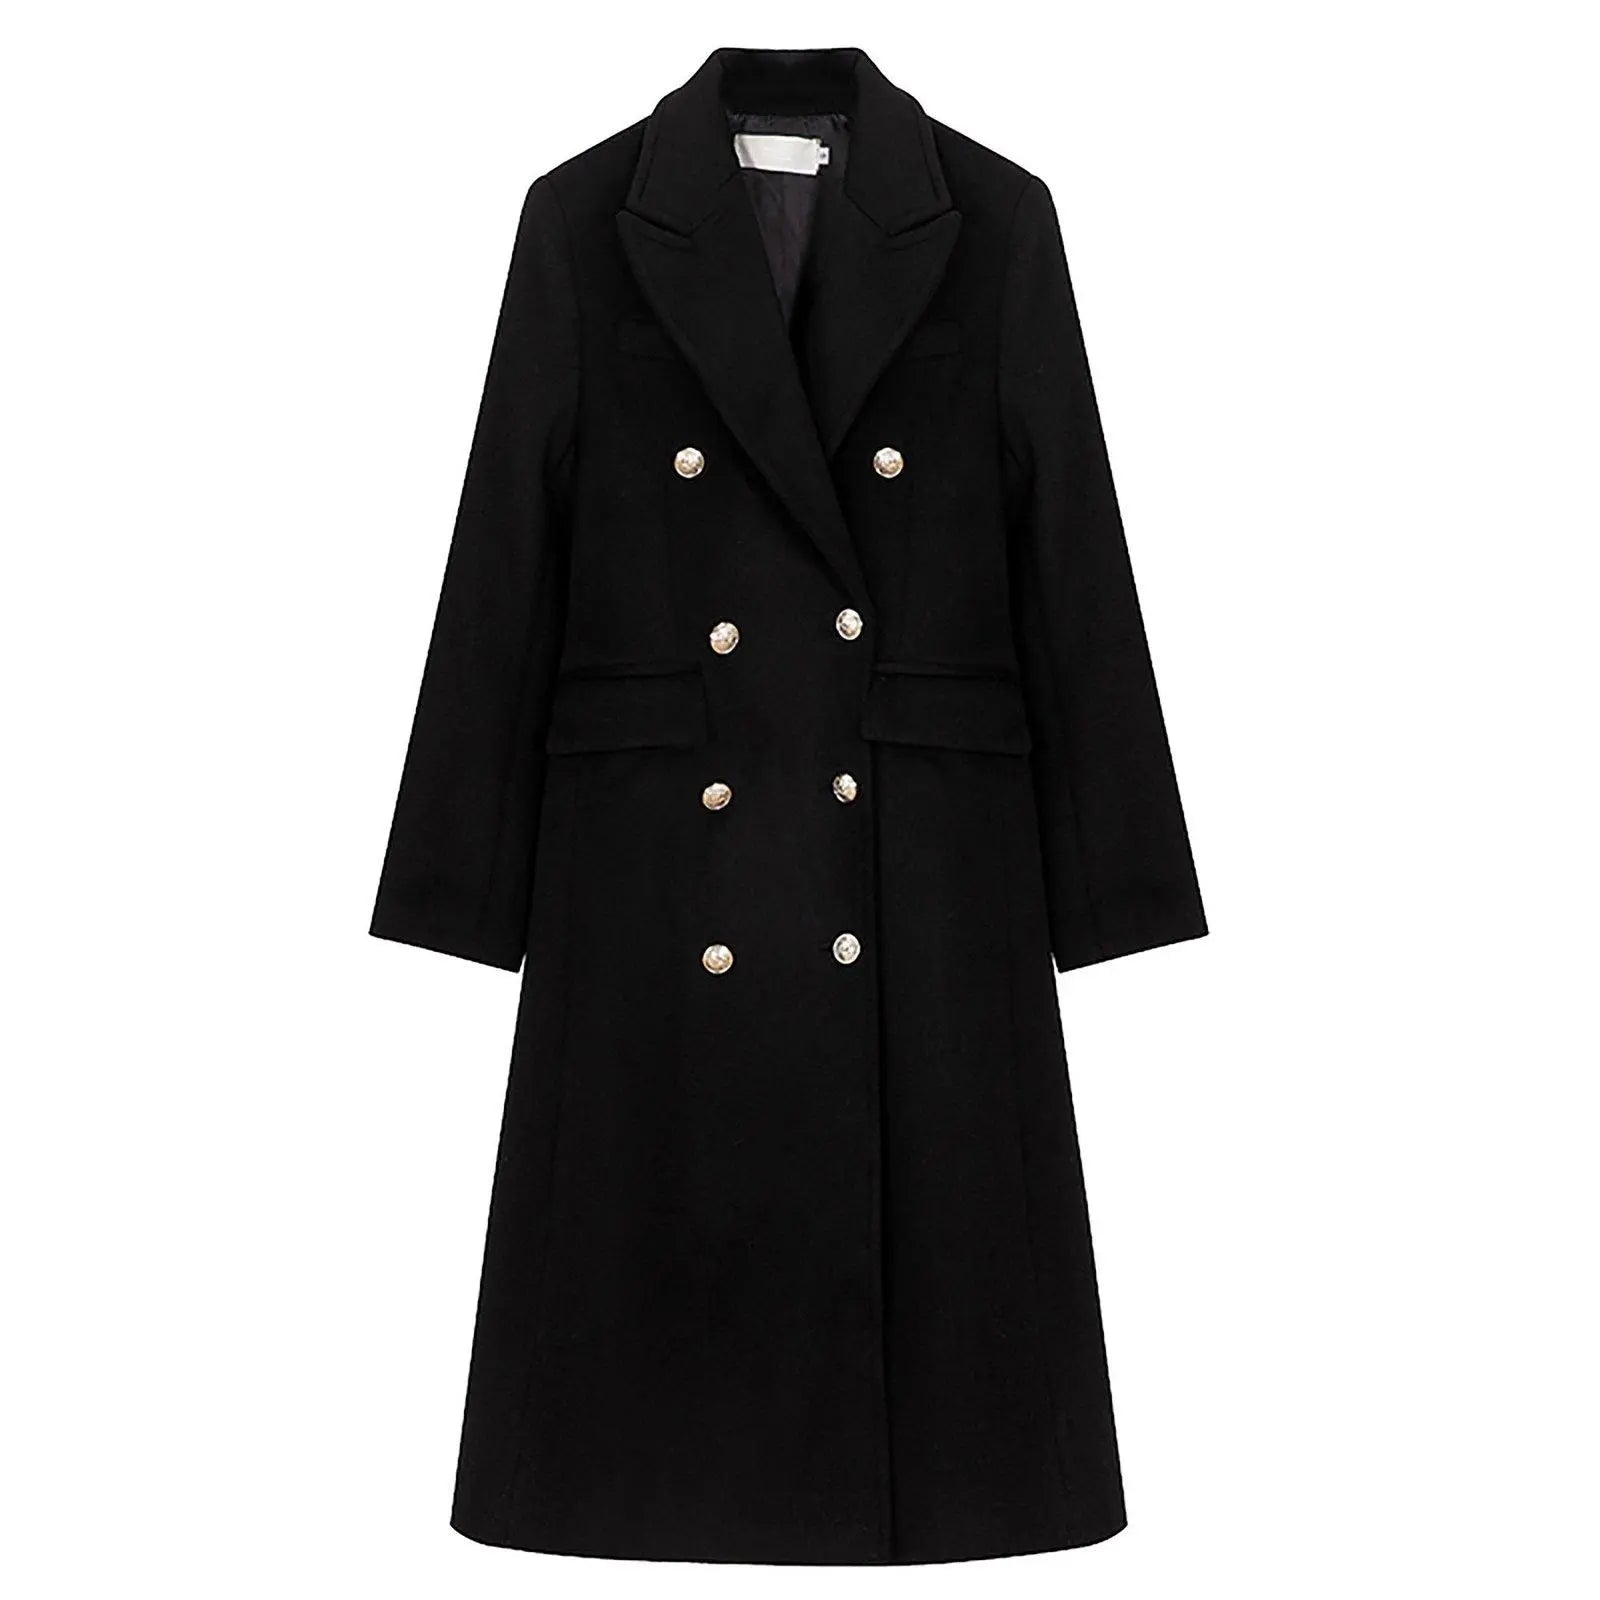 Women's Black thick Wool Coat,Double breasted wool coat,Black long coat,black wool coat,Warm black coat,Warm long black coat,Vivian7 W115 Vivian Seven